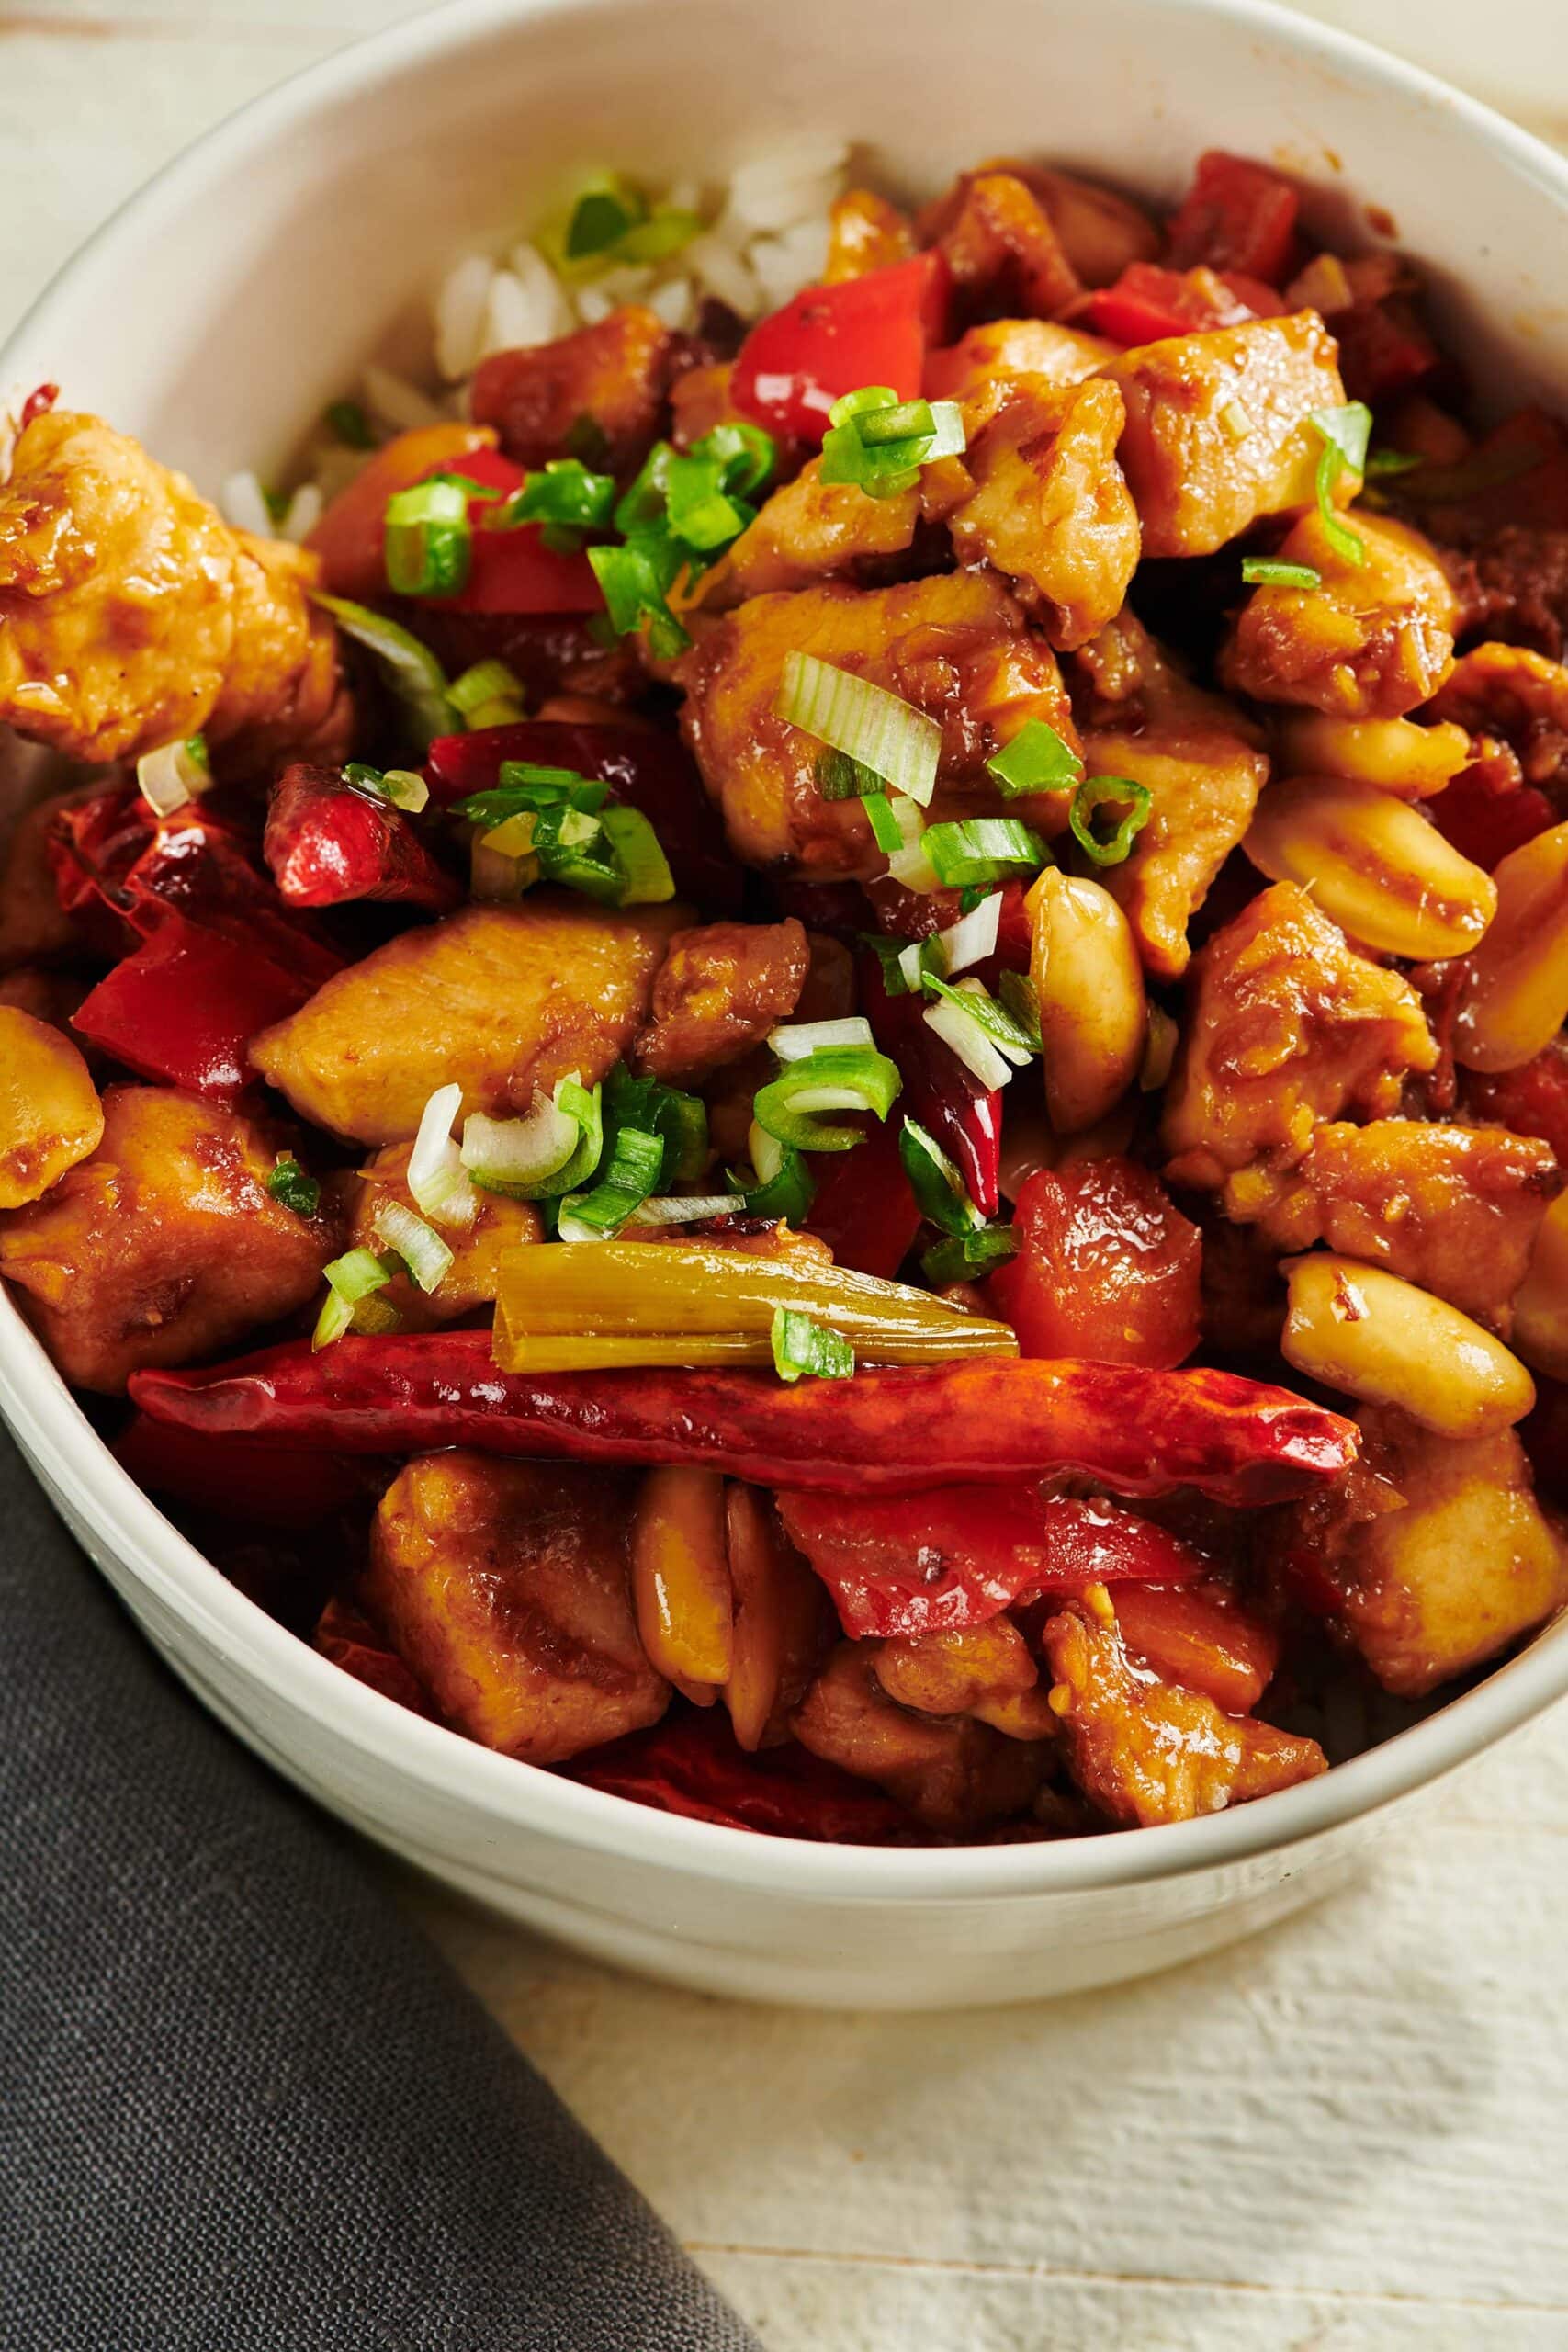 Bowl of Kung Pao Chicken on table.